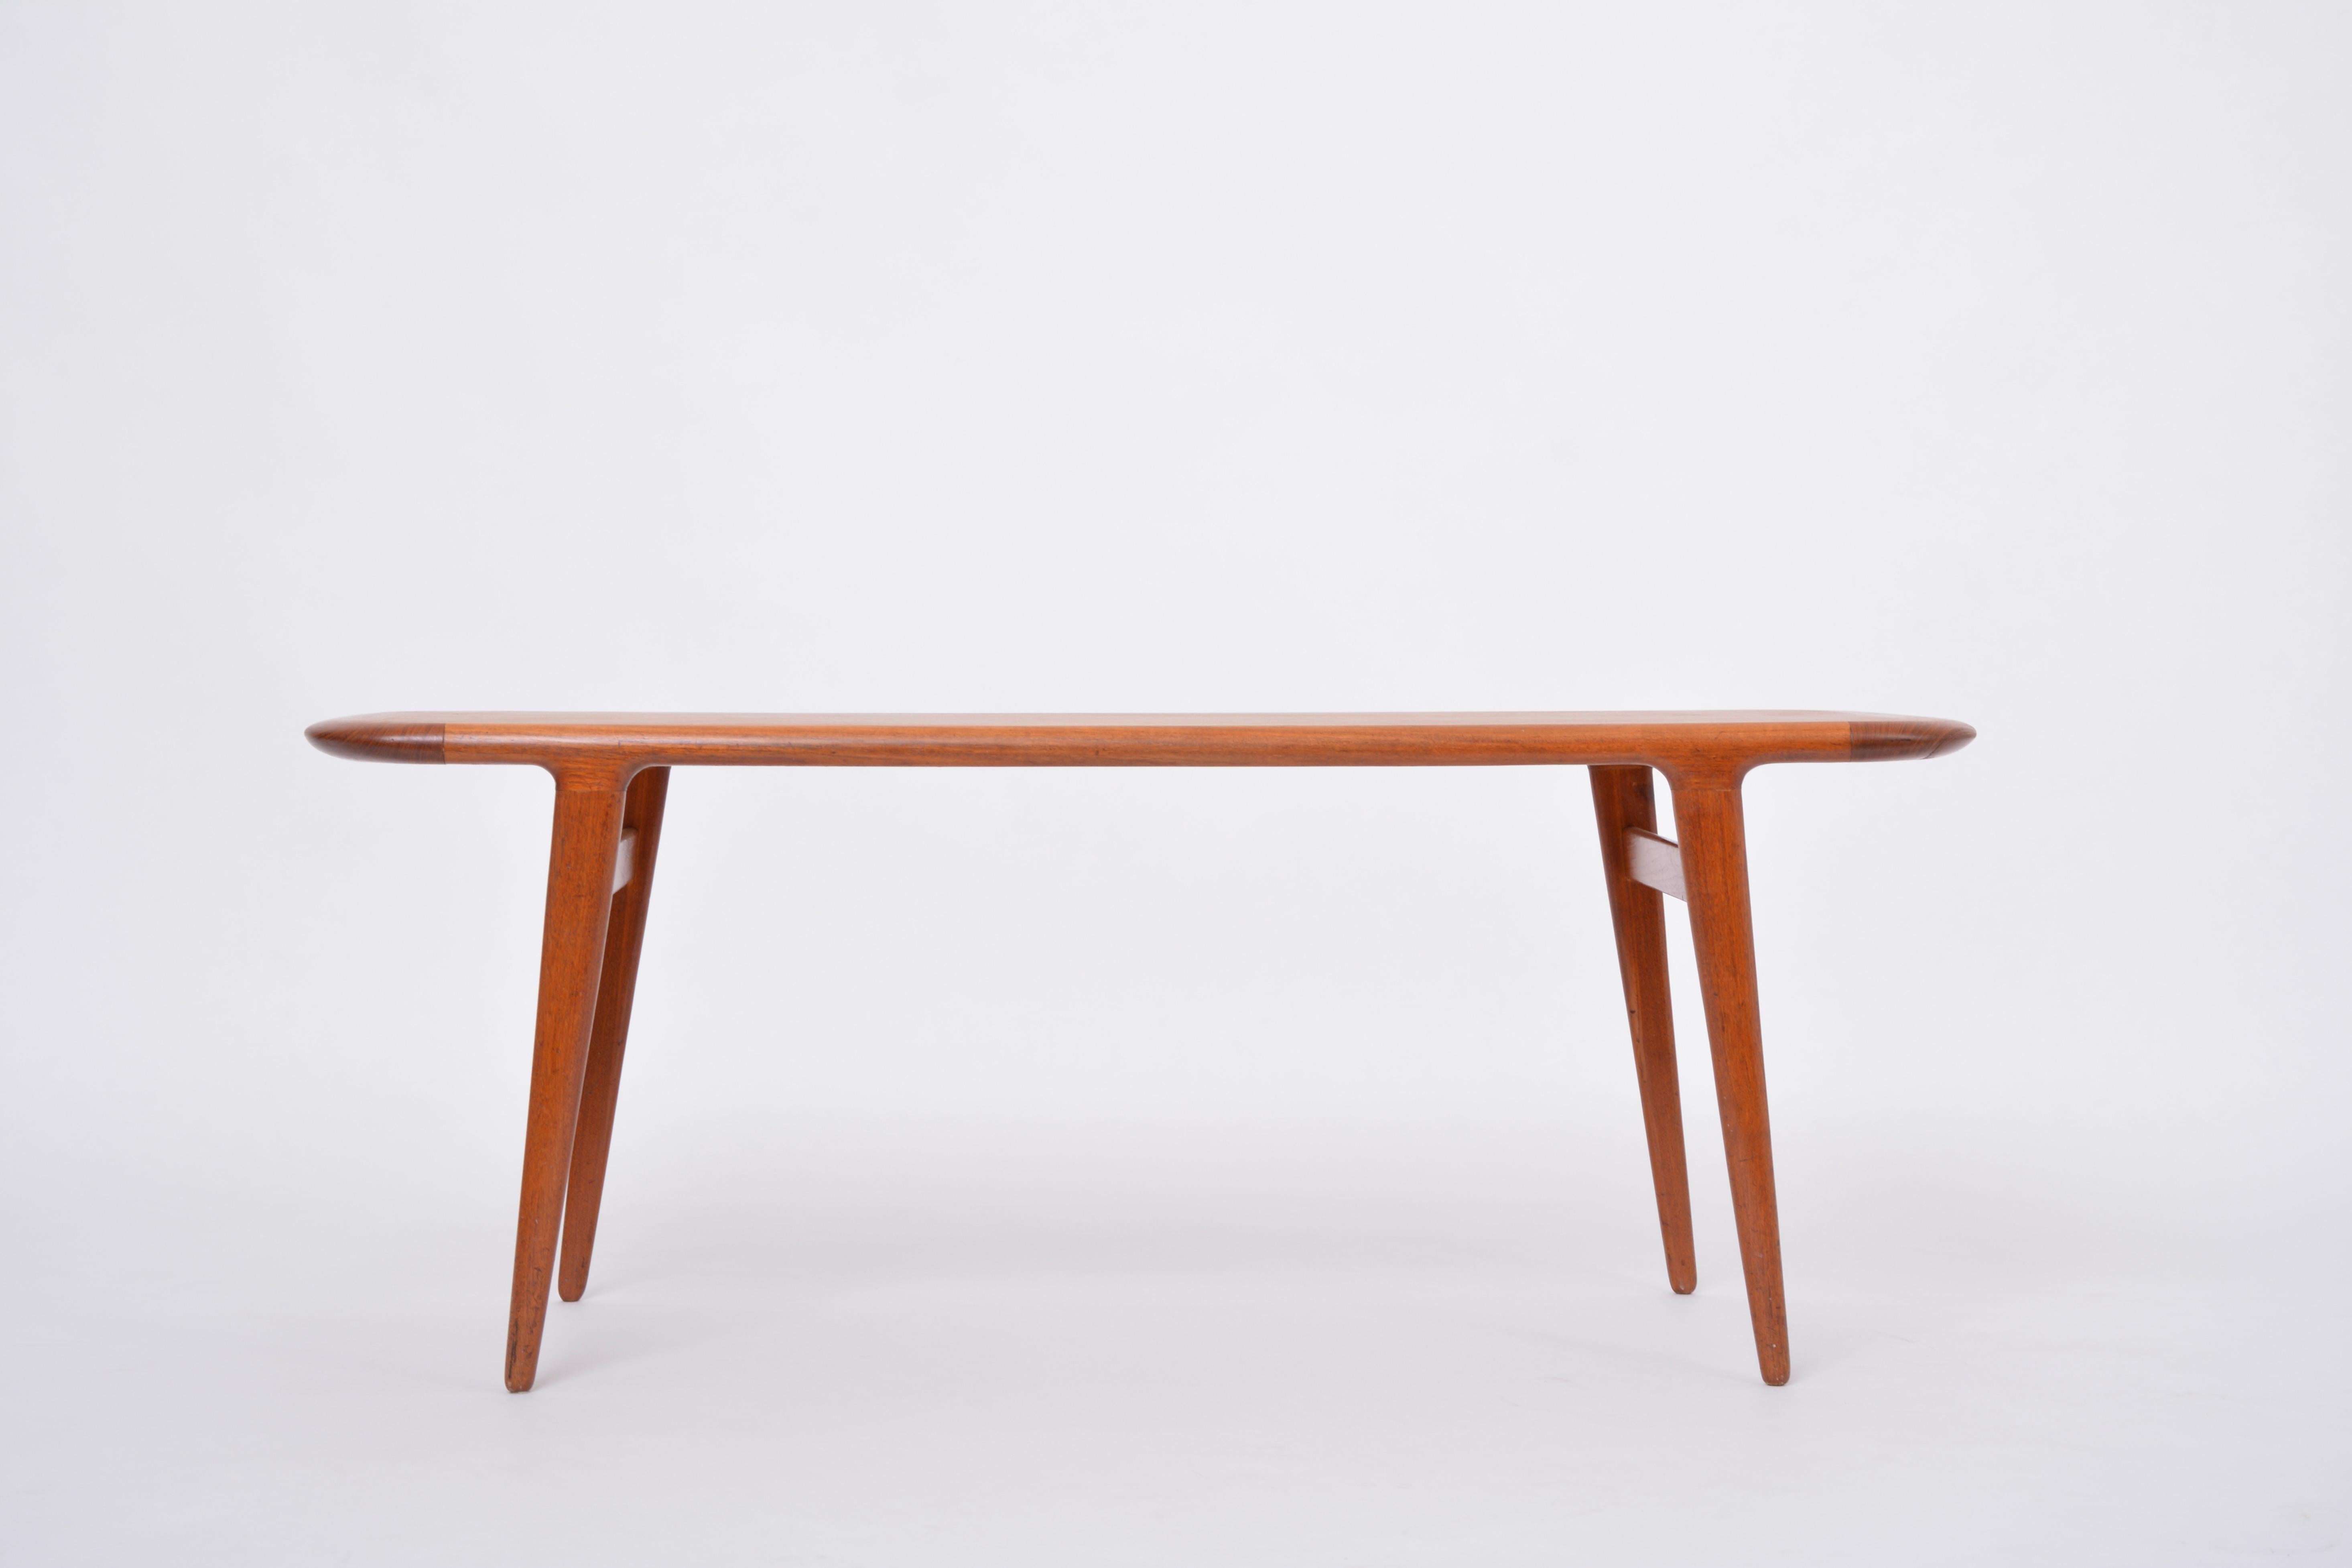 This coffee table was designed and manufactured in the 1960s in Denmark. It is made of Teak wood. The design reminds a lot of the designs of Danish design masters Hans Wegner and Johannes Andersen. Sourced from the heart of Denmark, this coffee